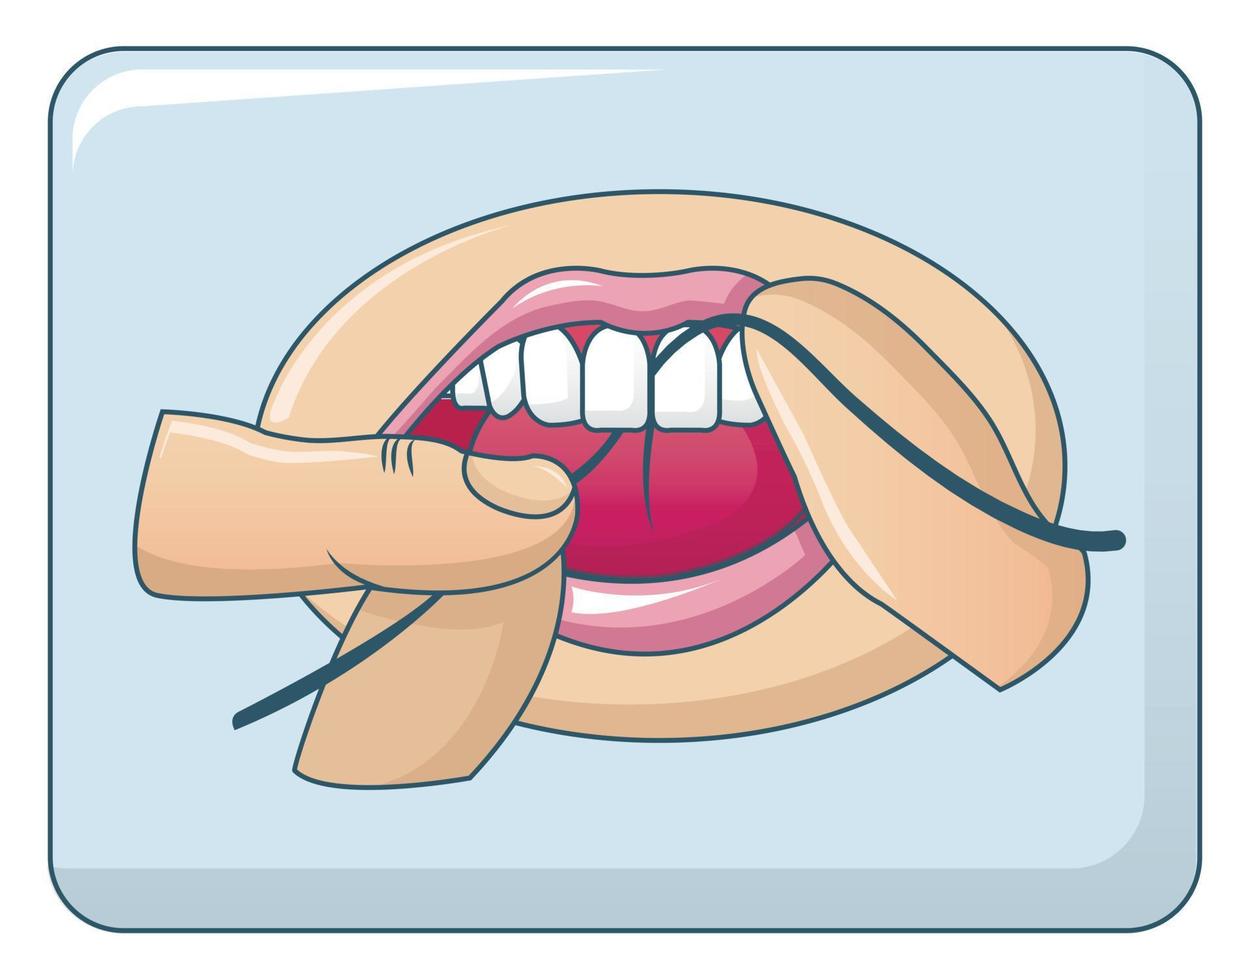 Dental floss in mouth concept background, cartoon style vector